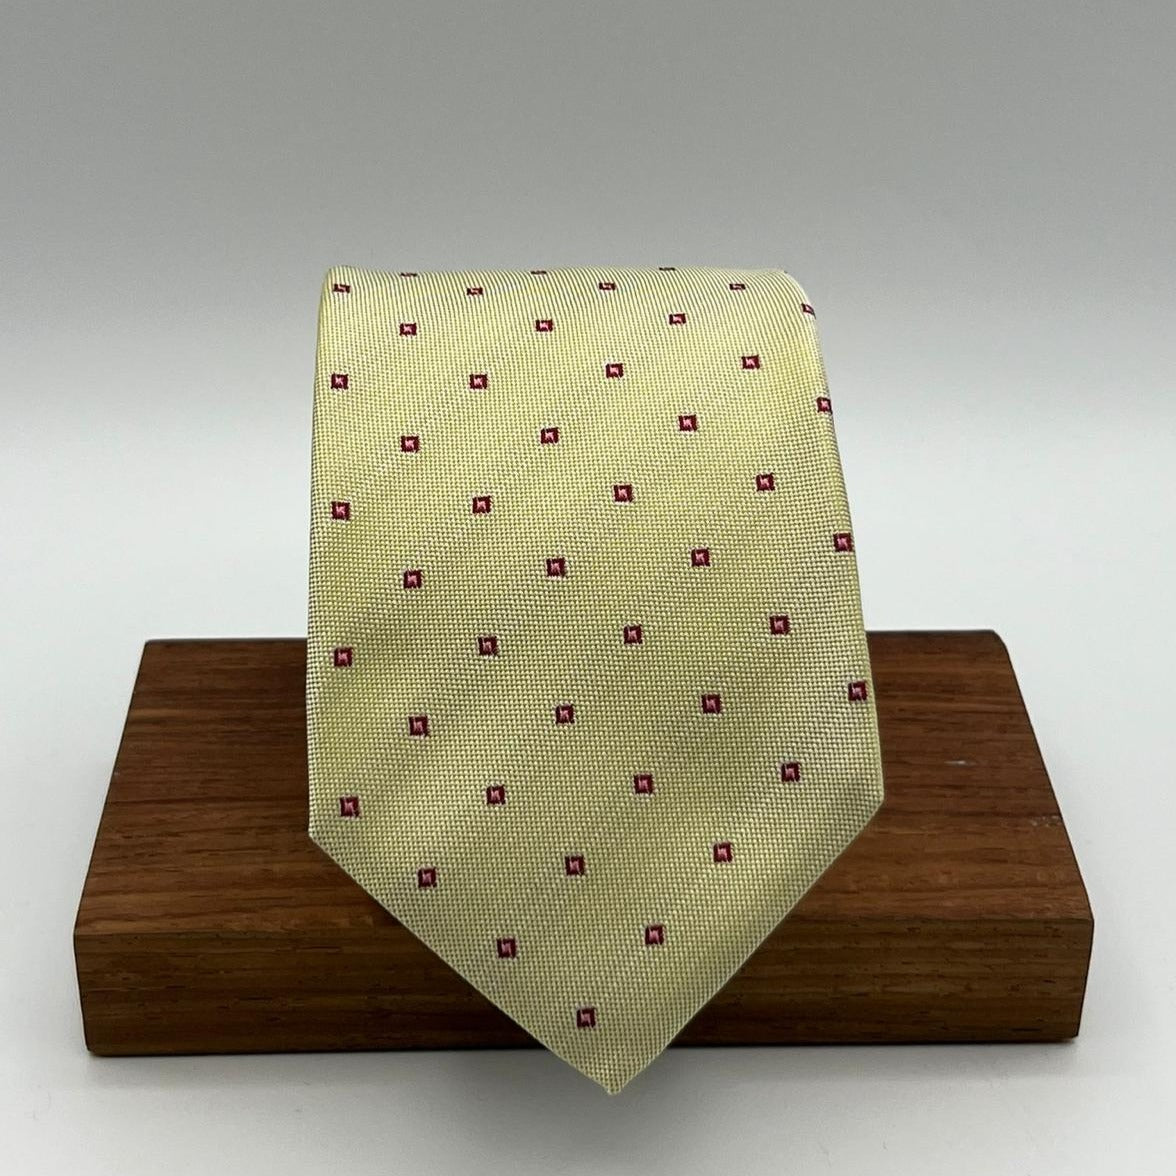 Drake's for Cruciani & Bella 100%  Woven Silk Jacquard Tipped Light Yellow, Red and Rust Motif Tie Handmade in London, England 9 cm x 148 cm #5381